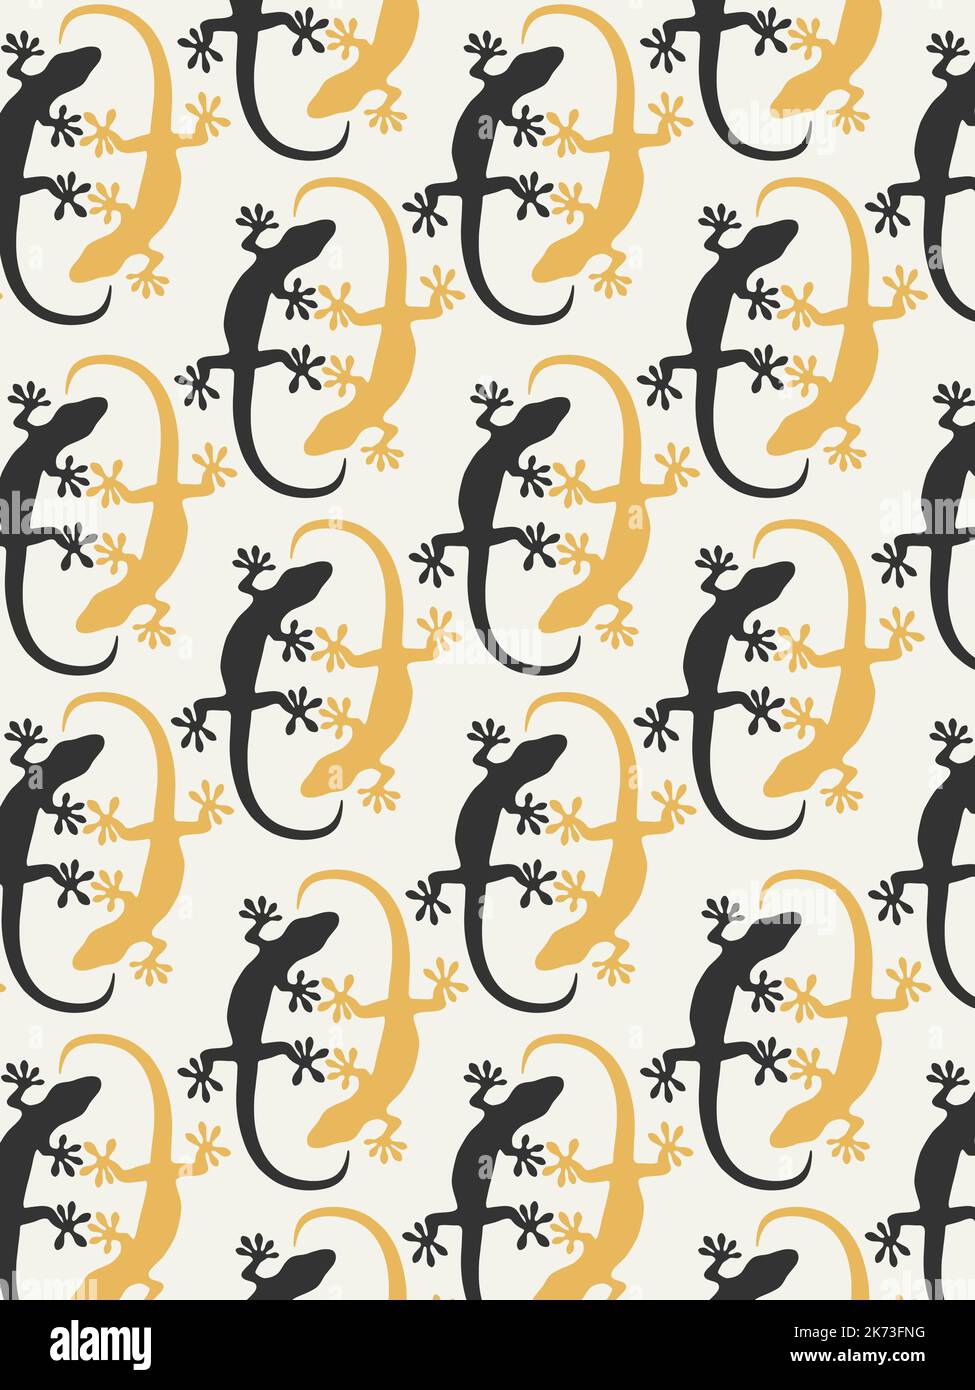 Geckos in black and yellow pattern on light background Stock Vector